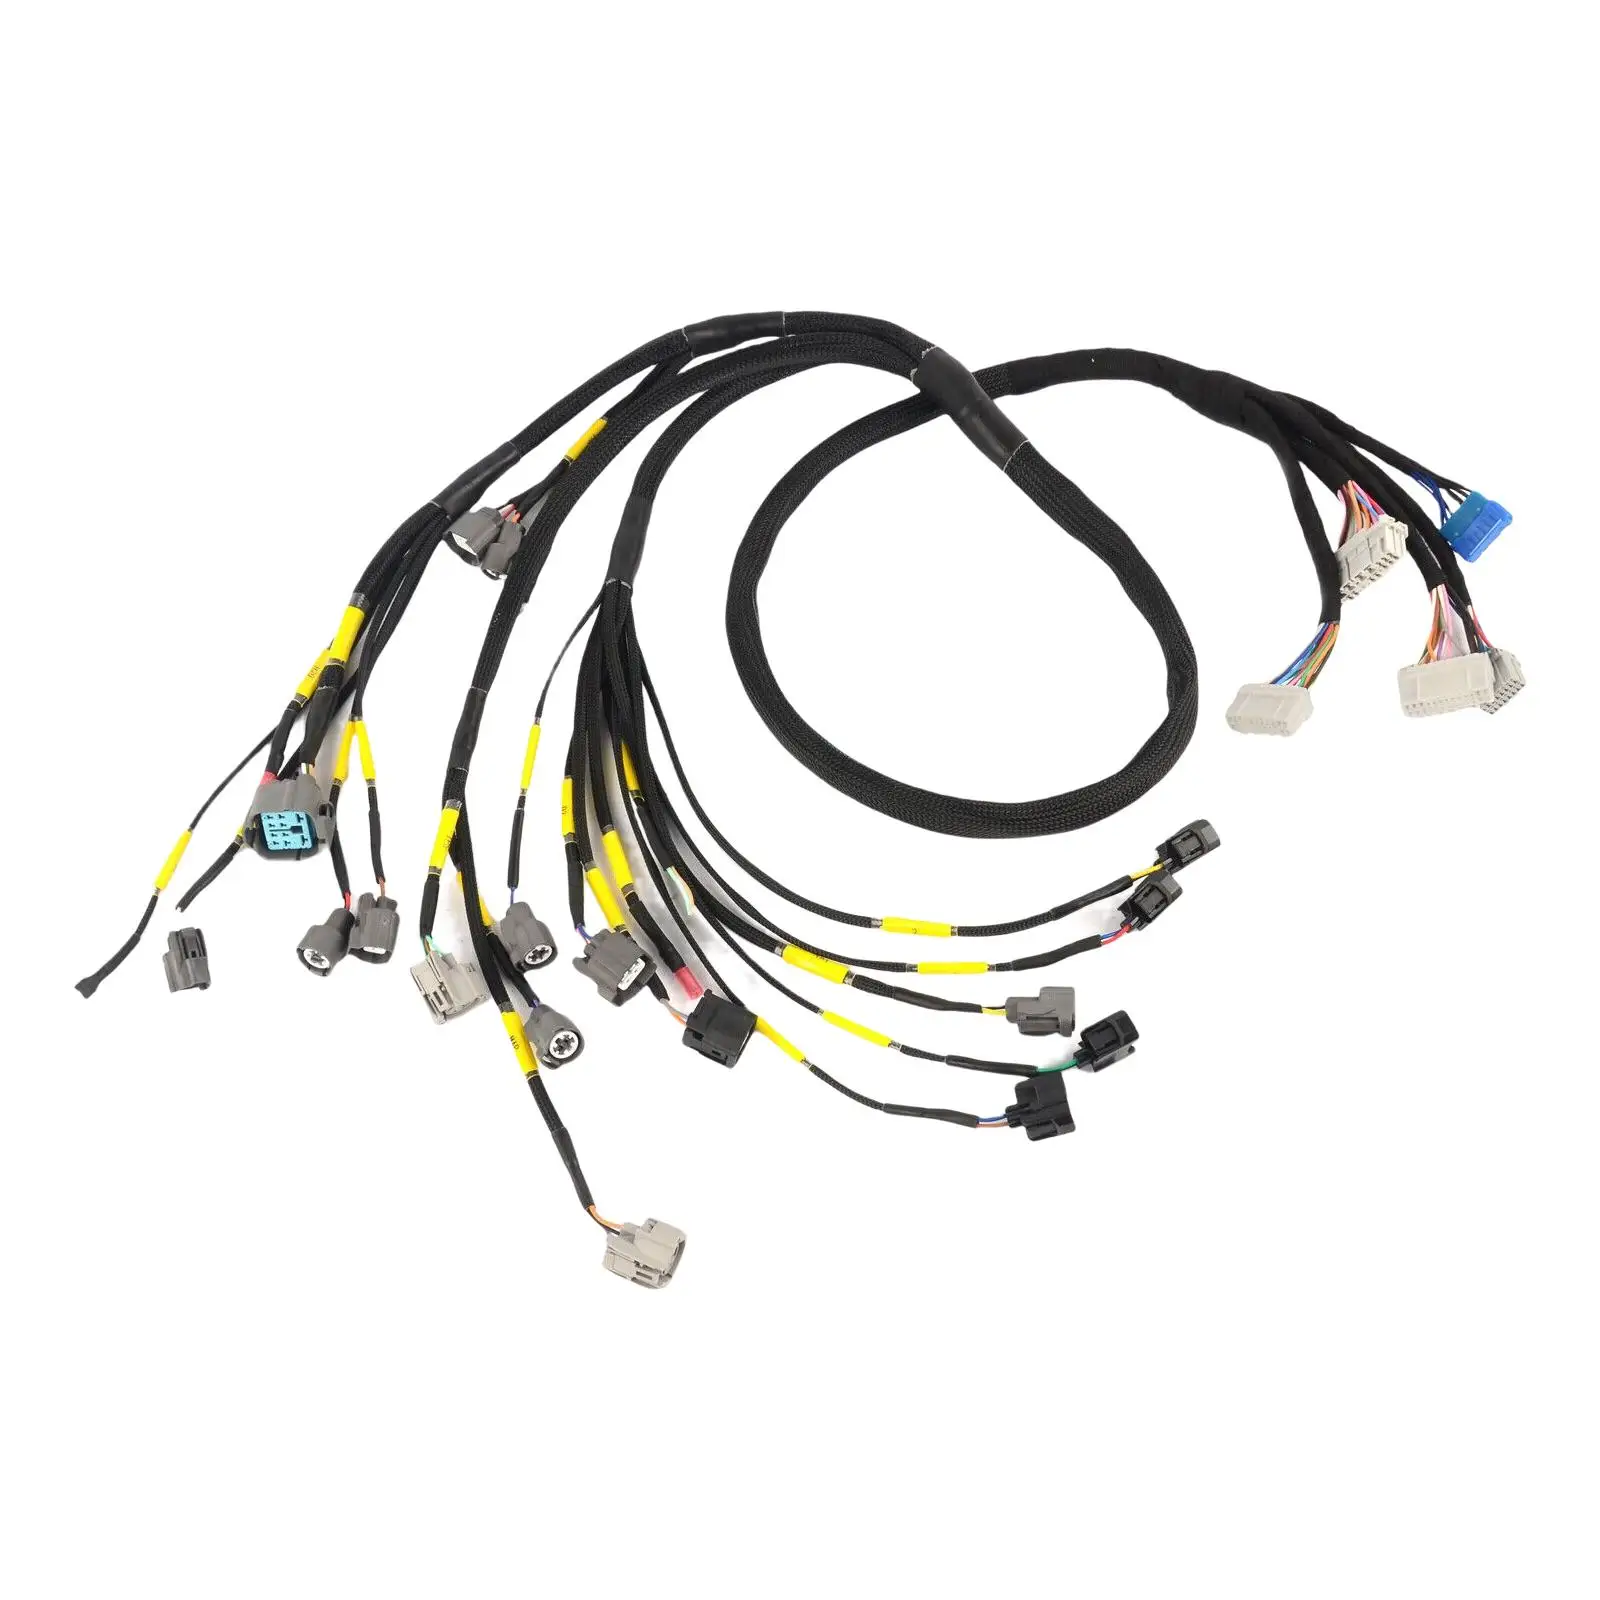 Engine Harness Cnch-Obd2-1 for Honda Civic Easily Install Accessories